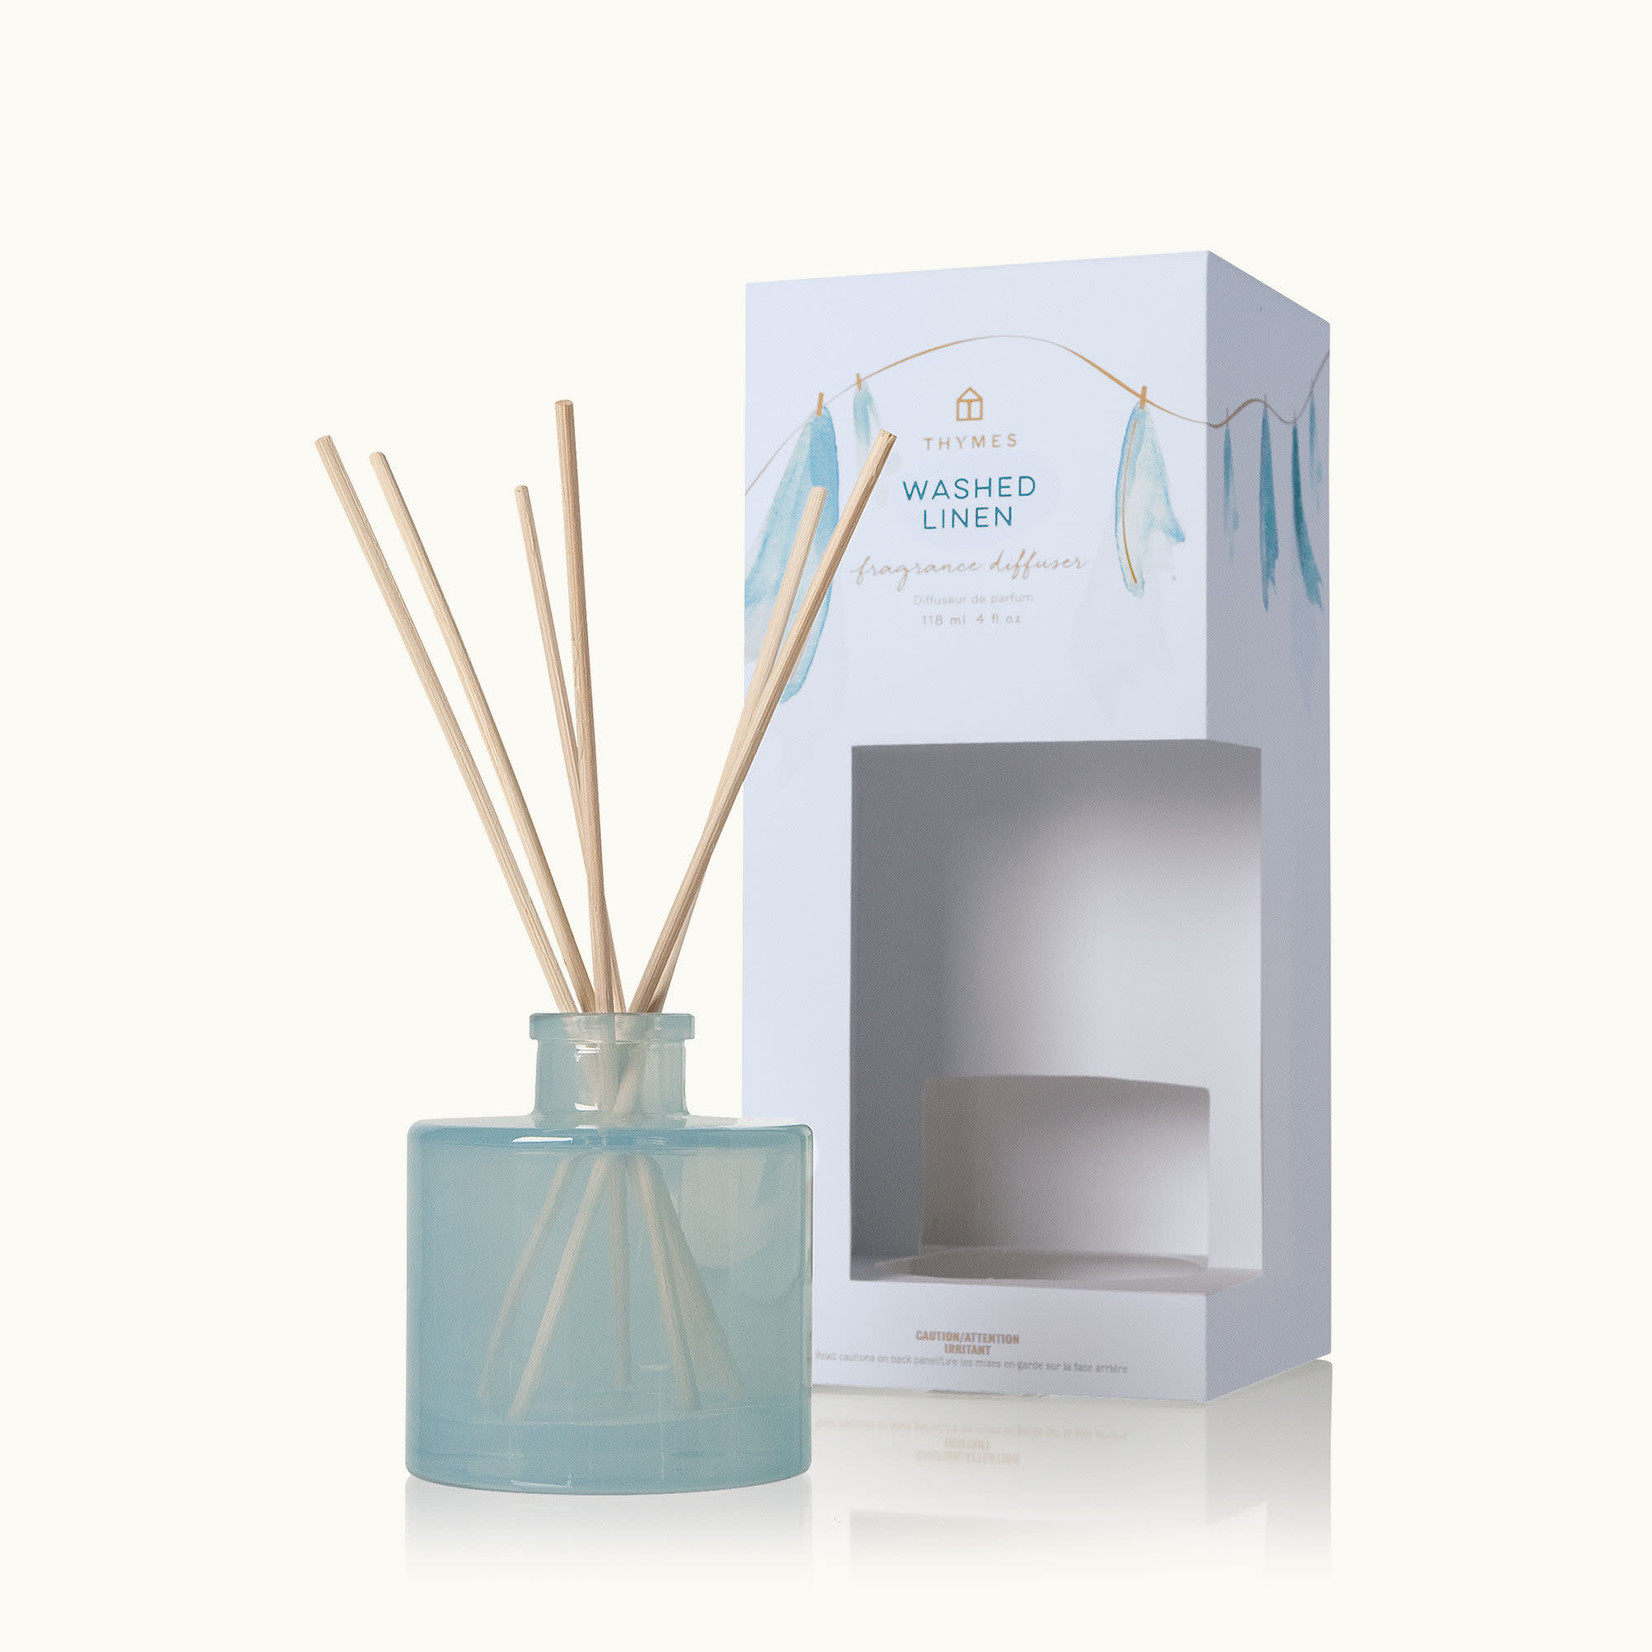 Thymes Thymes Washed Linen Fragrance Diffuser  4 oz